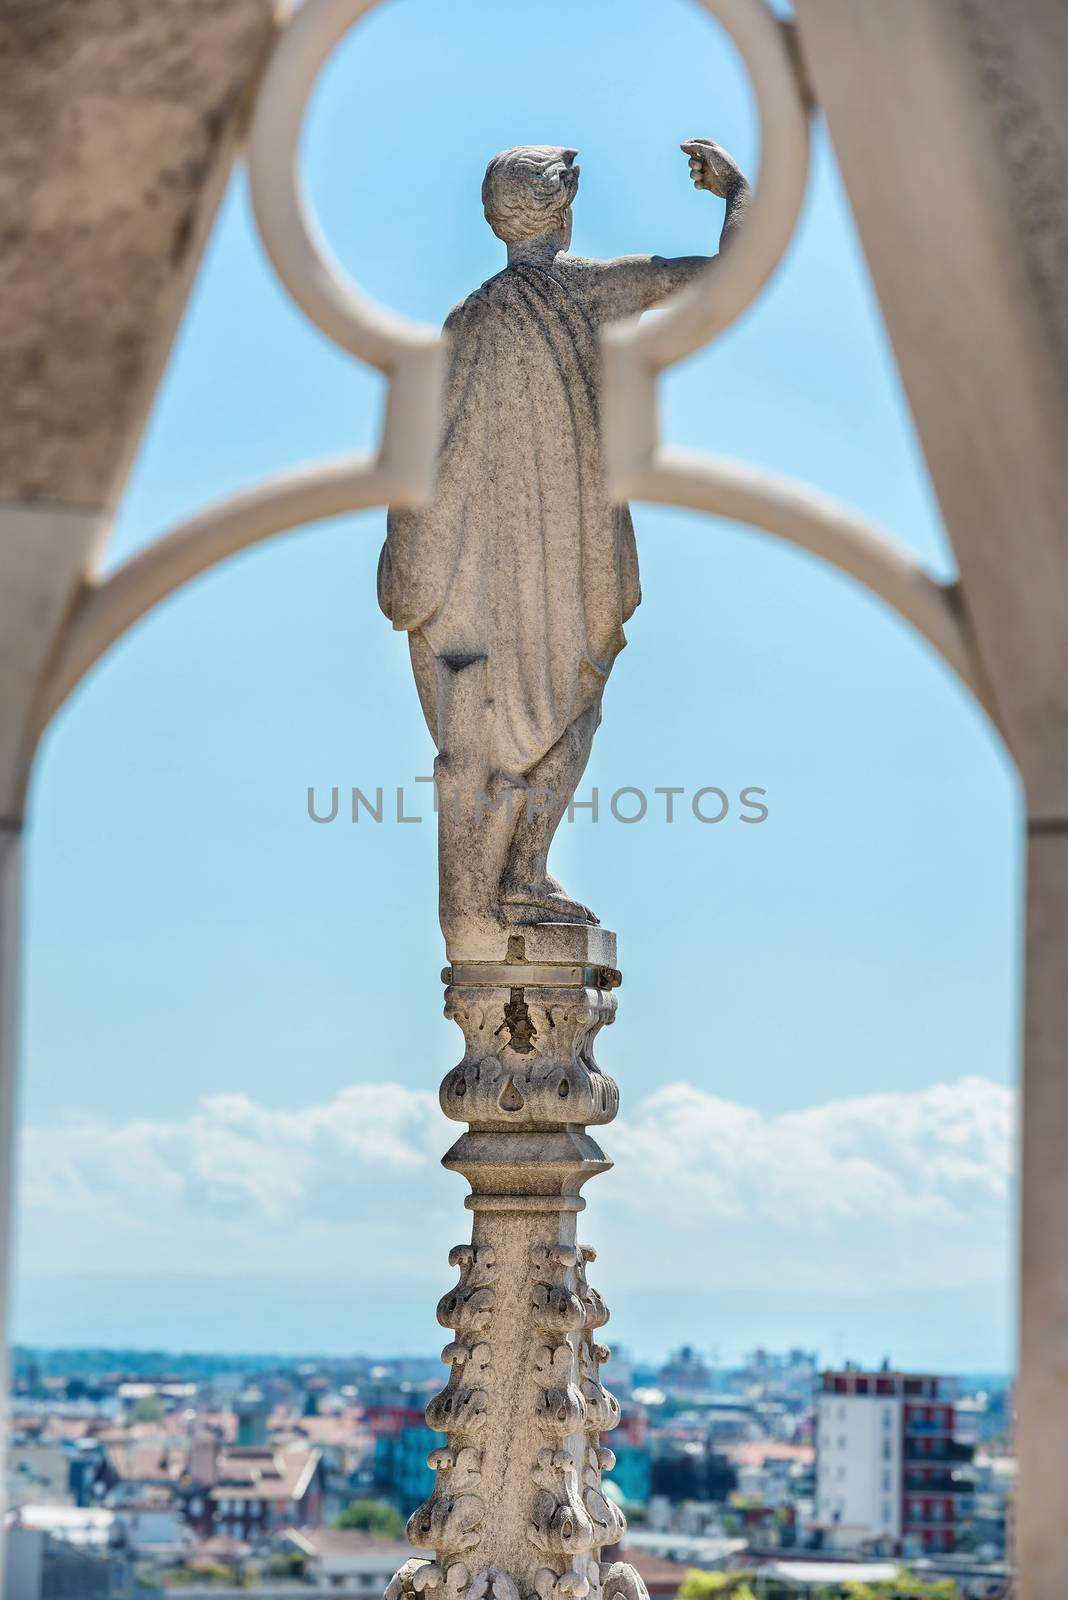 Statues on the roof of famous Milan Cathedral Duomo by vapi